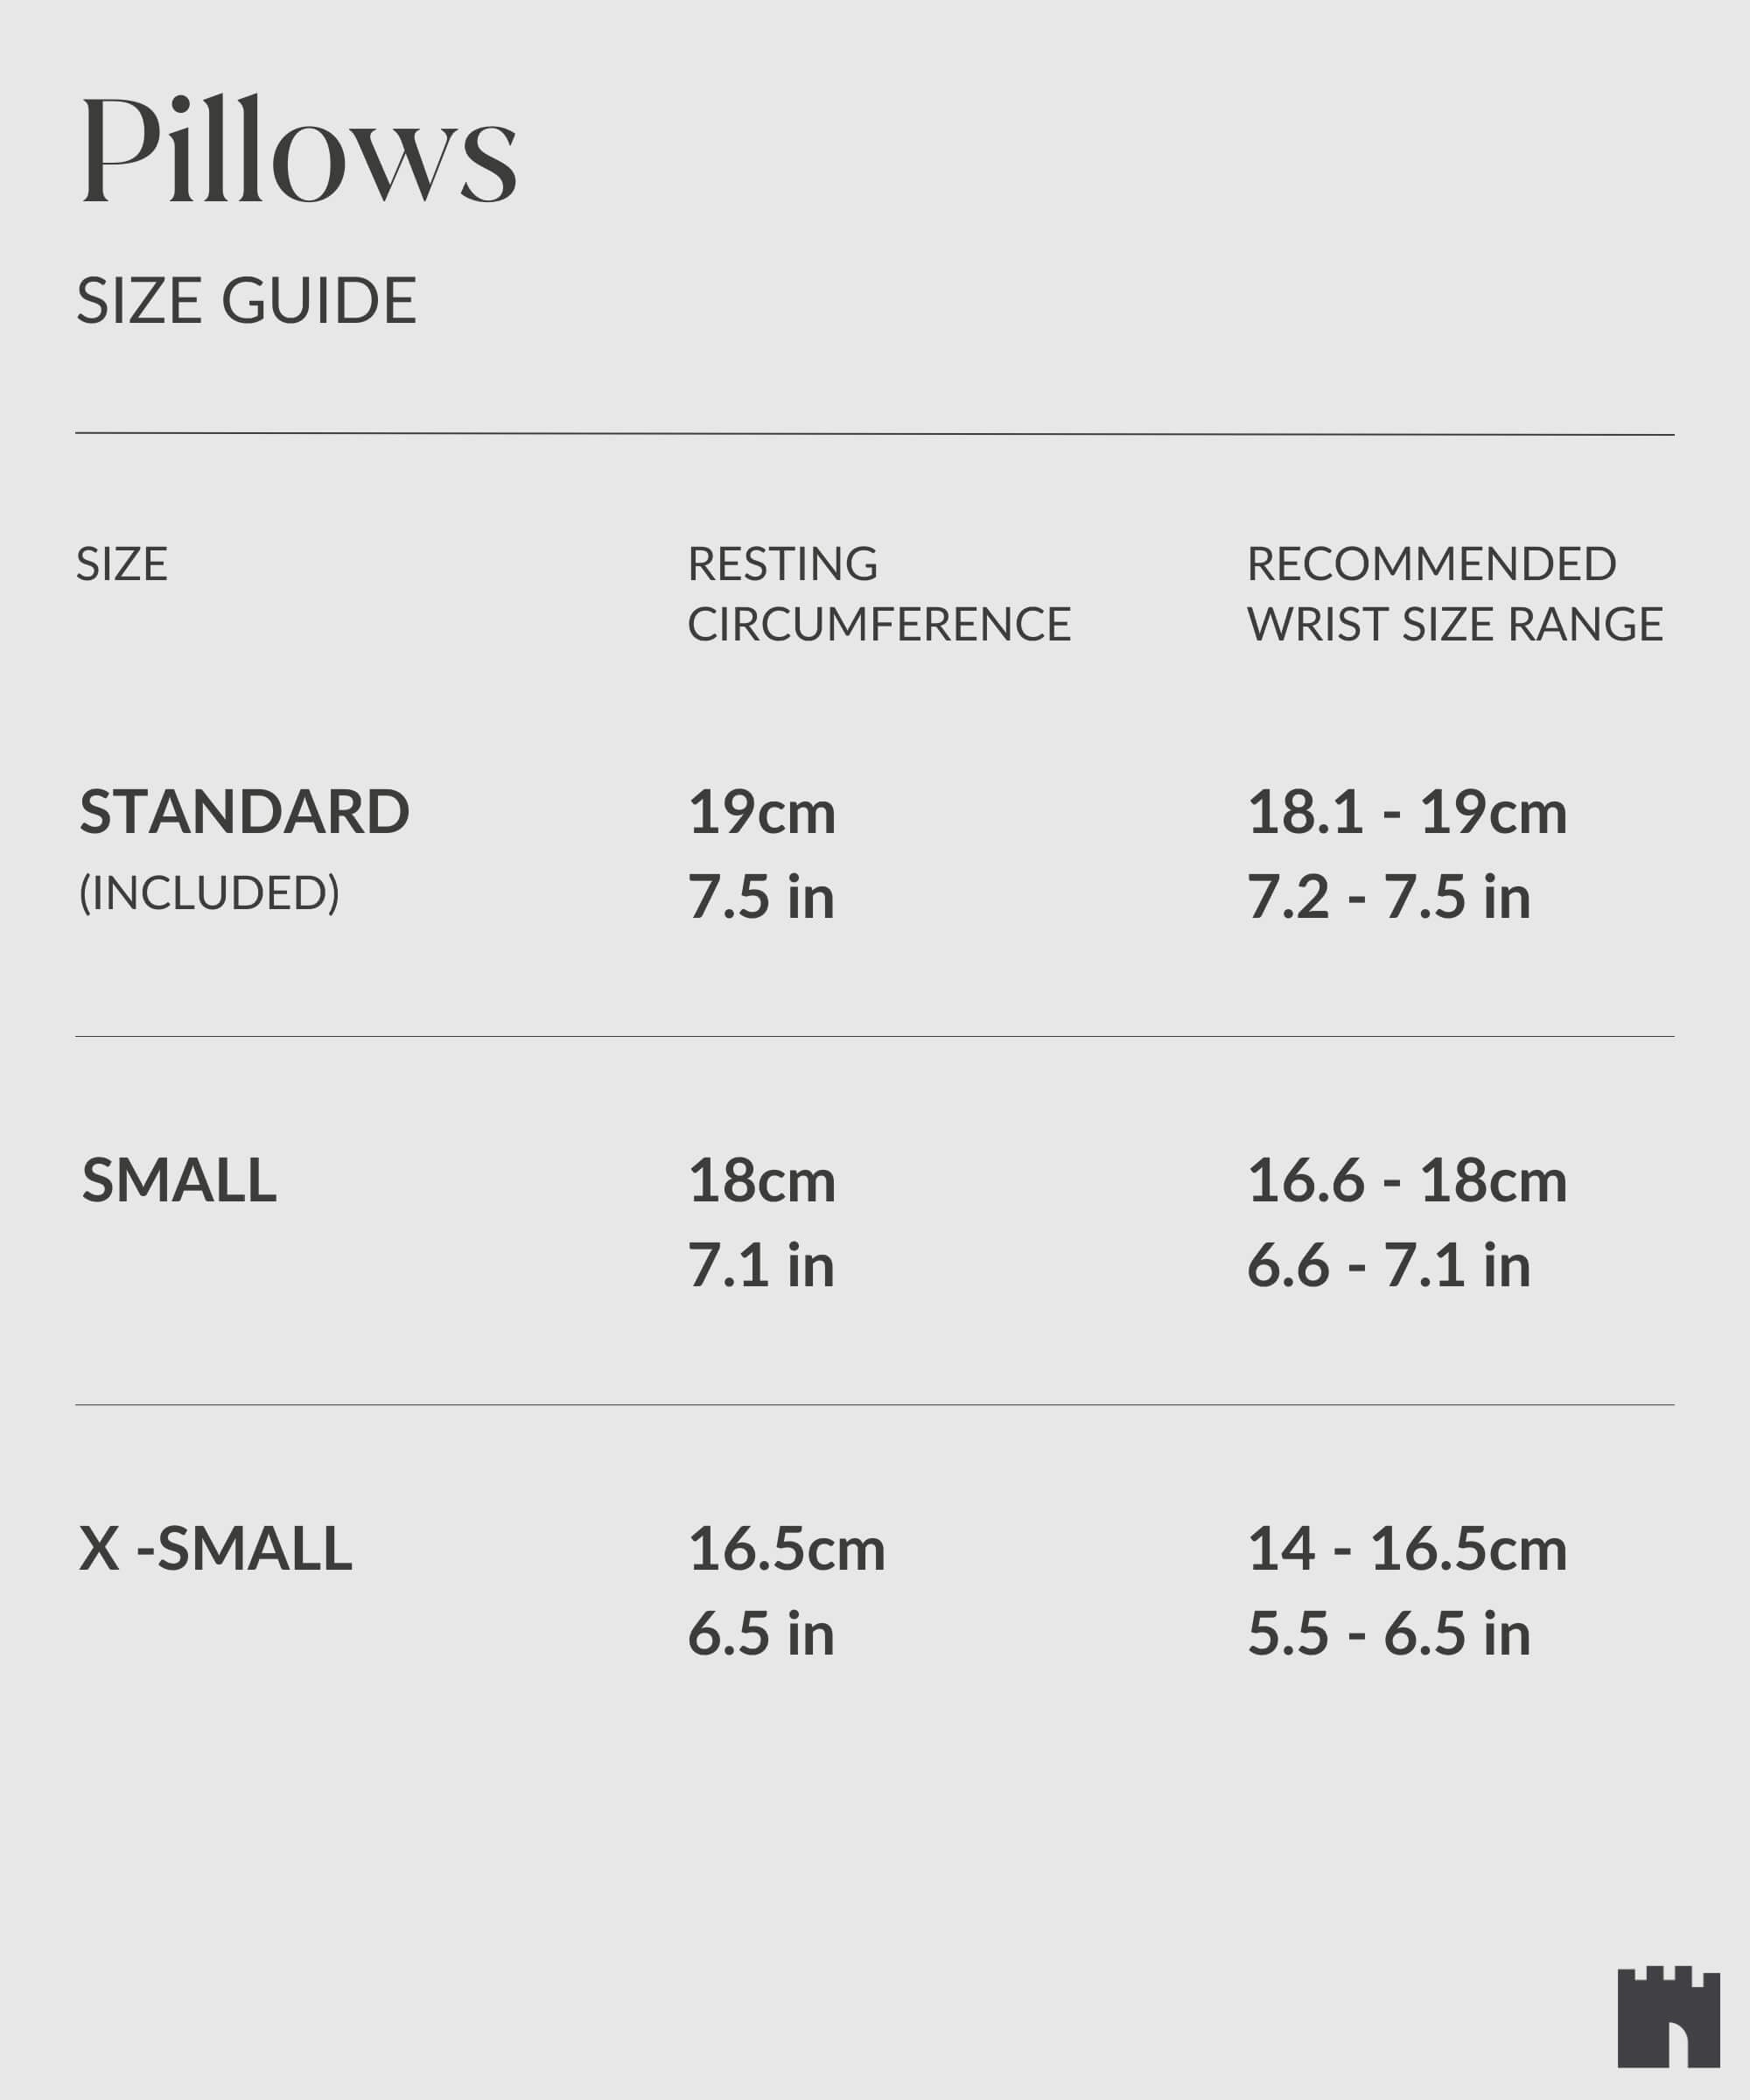 The comprehensive size guide for storage pillows includes information on different dimensions and sizes suitable for Bayswater 8 Slot Watch Boxes with Drawer - Brown and TAWBURY men's watch cases.